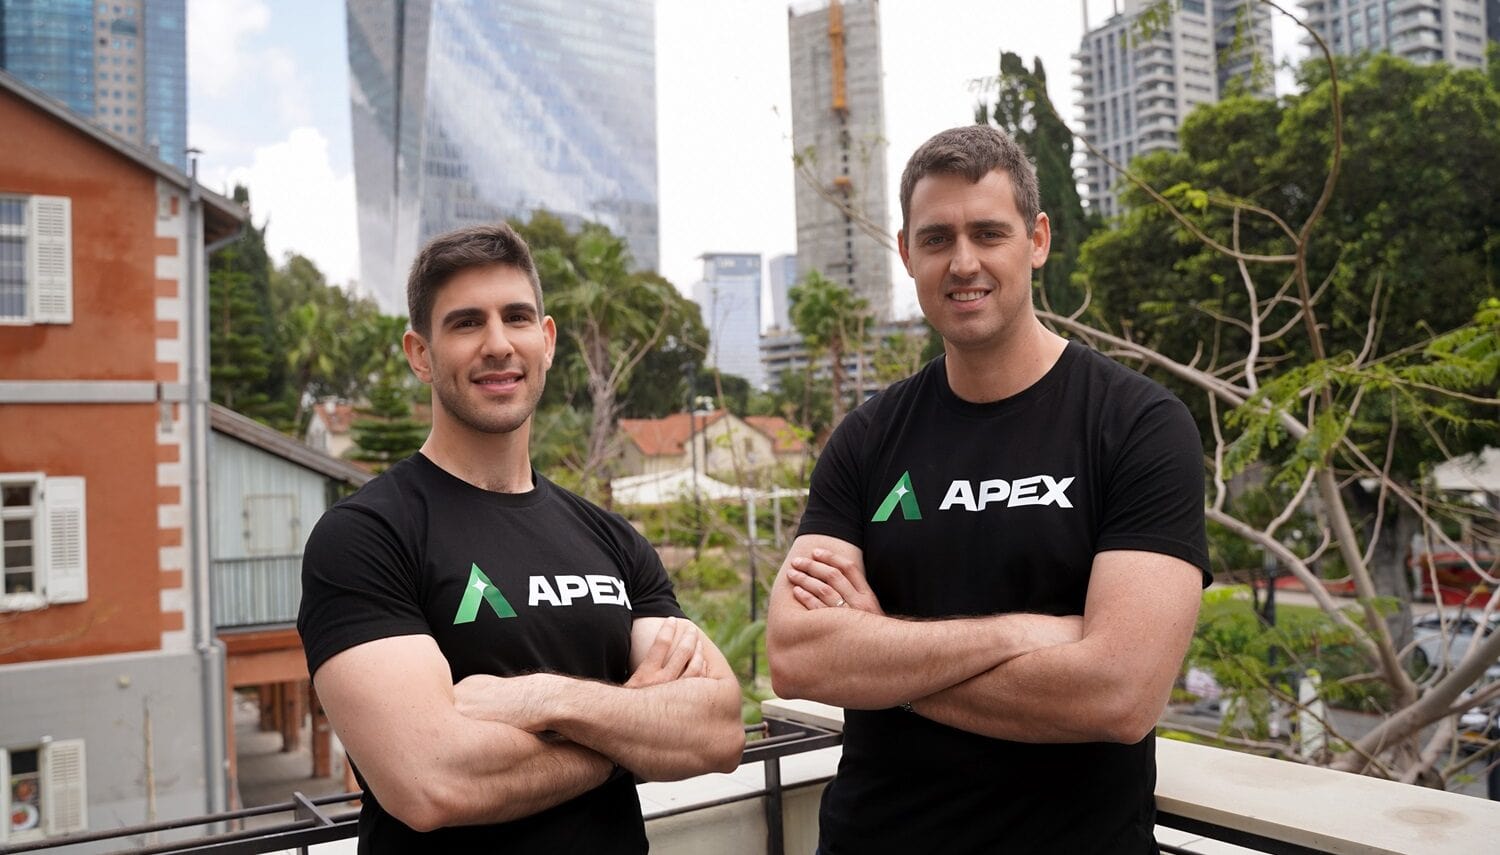 From left, Apex Security founders Tomer Avni and Matan Derman. Photo by Ben Hakim